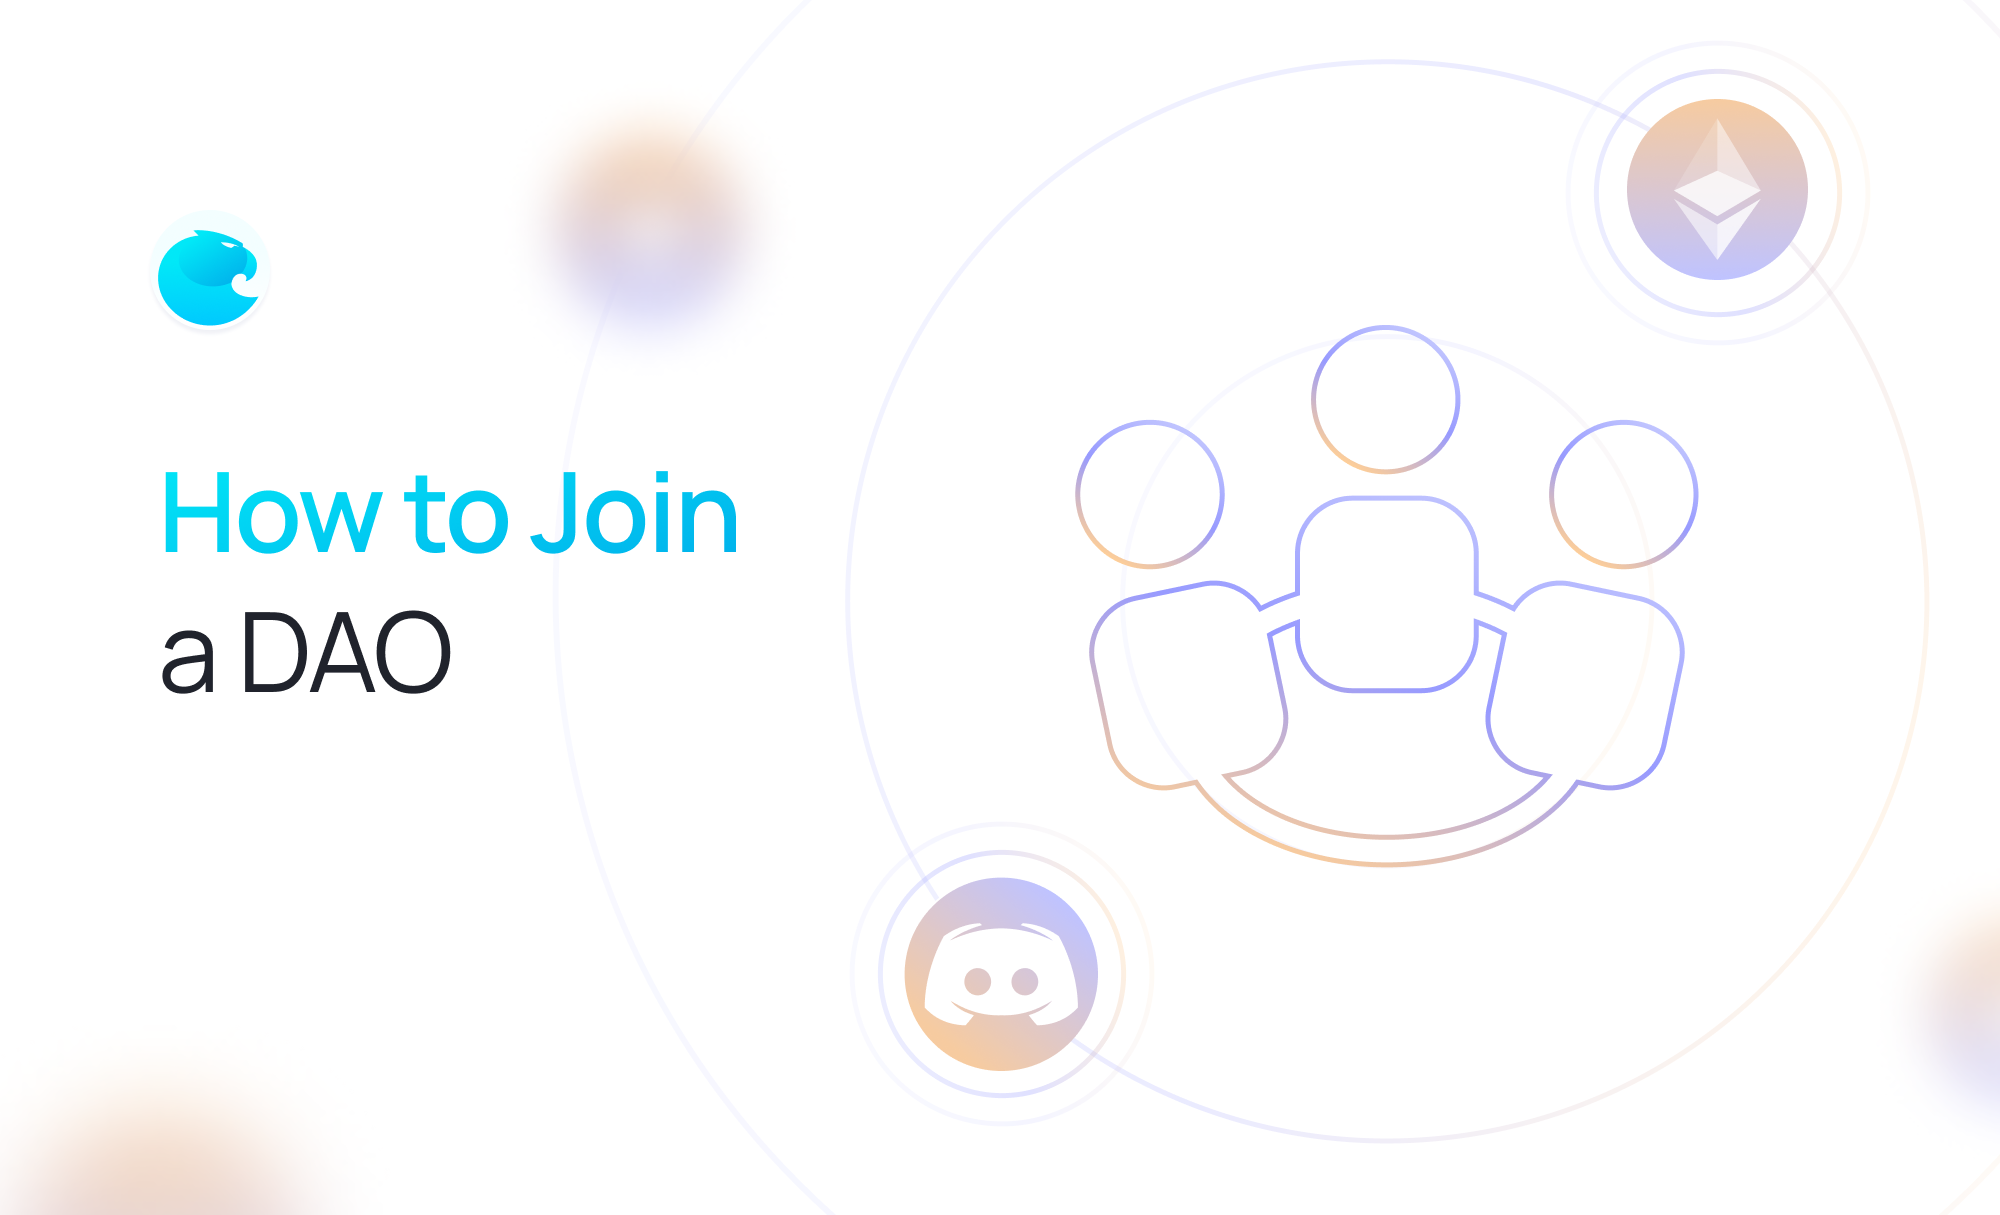 How to Join a DAO